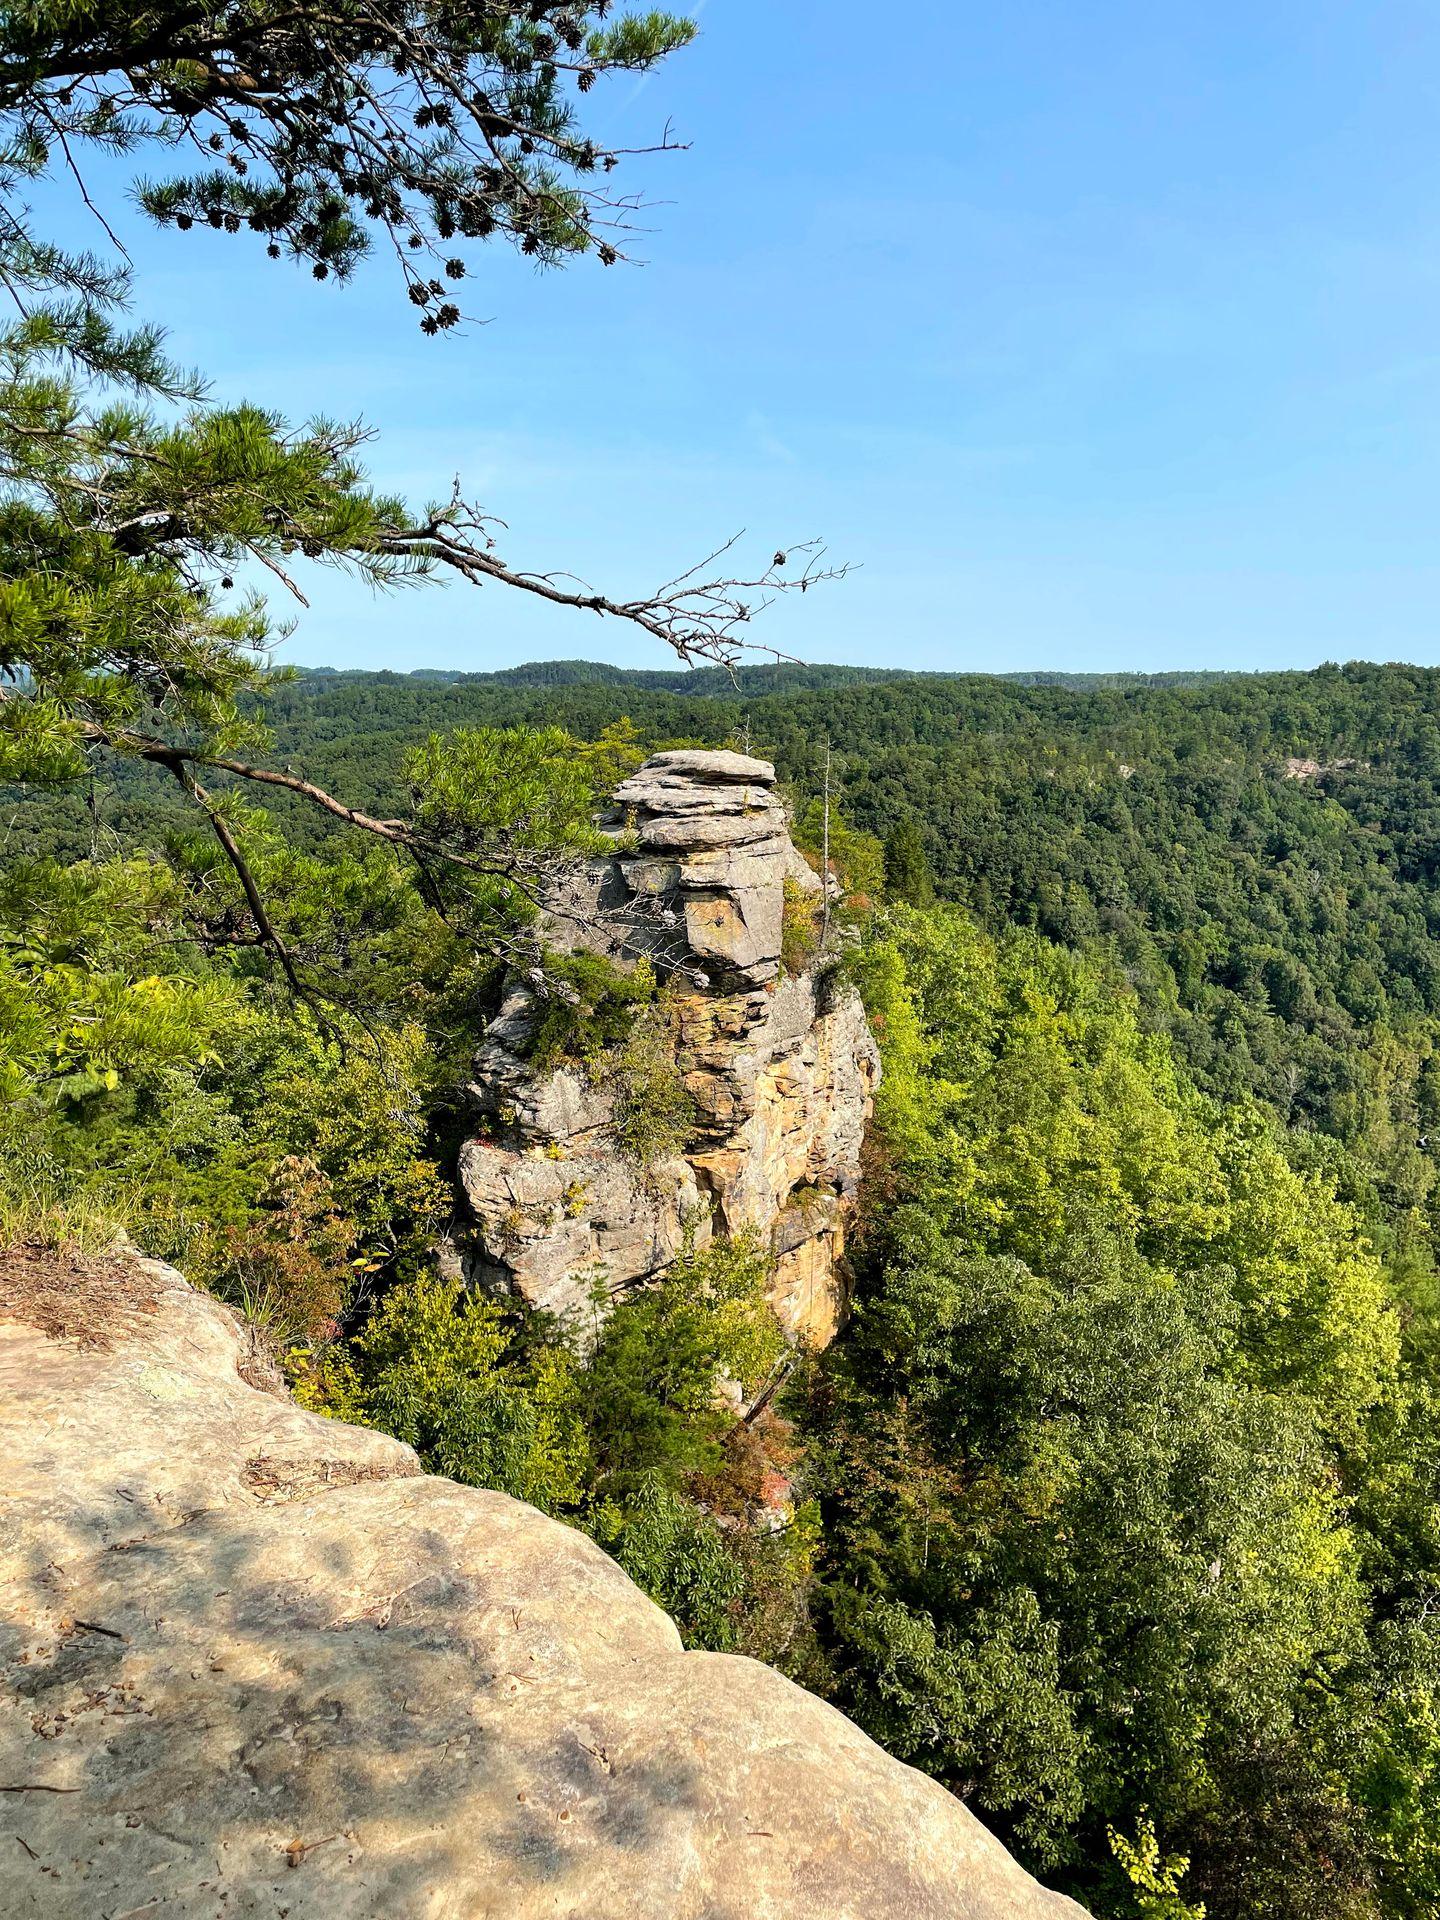 A large, rounded seen from the trail at Natural Bridge State Resort Park